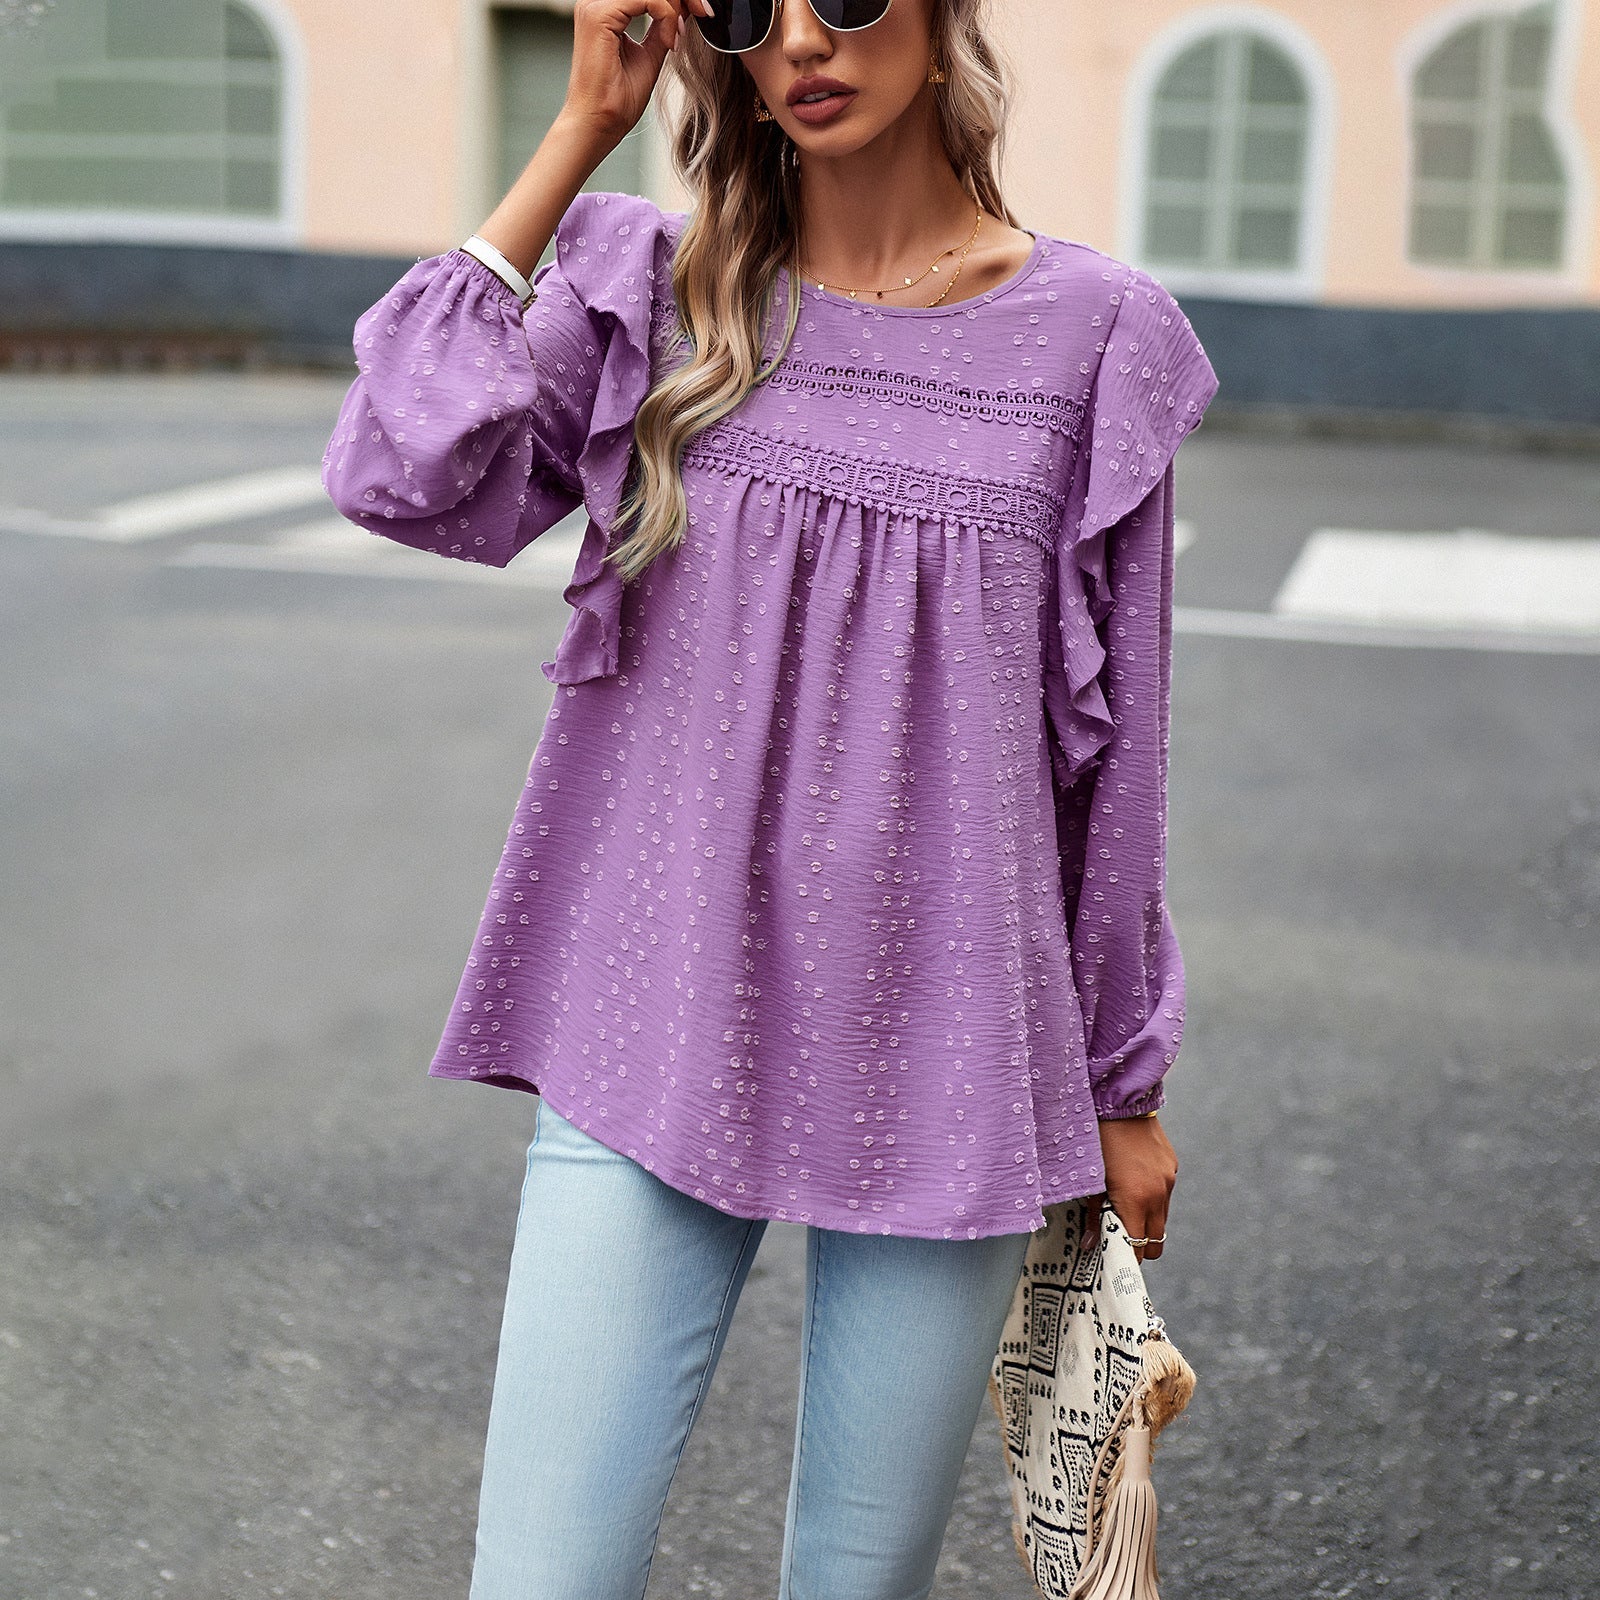 Design Solid Color Shirt Women Autumn Winter Casual Long Sleeve Top